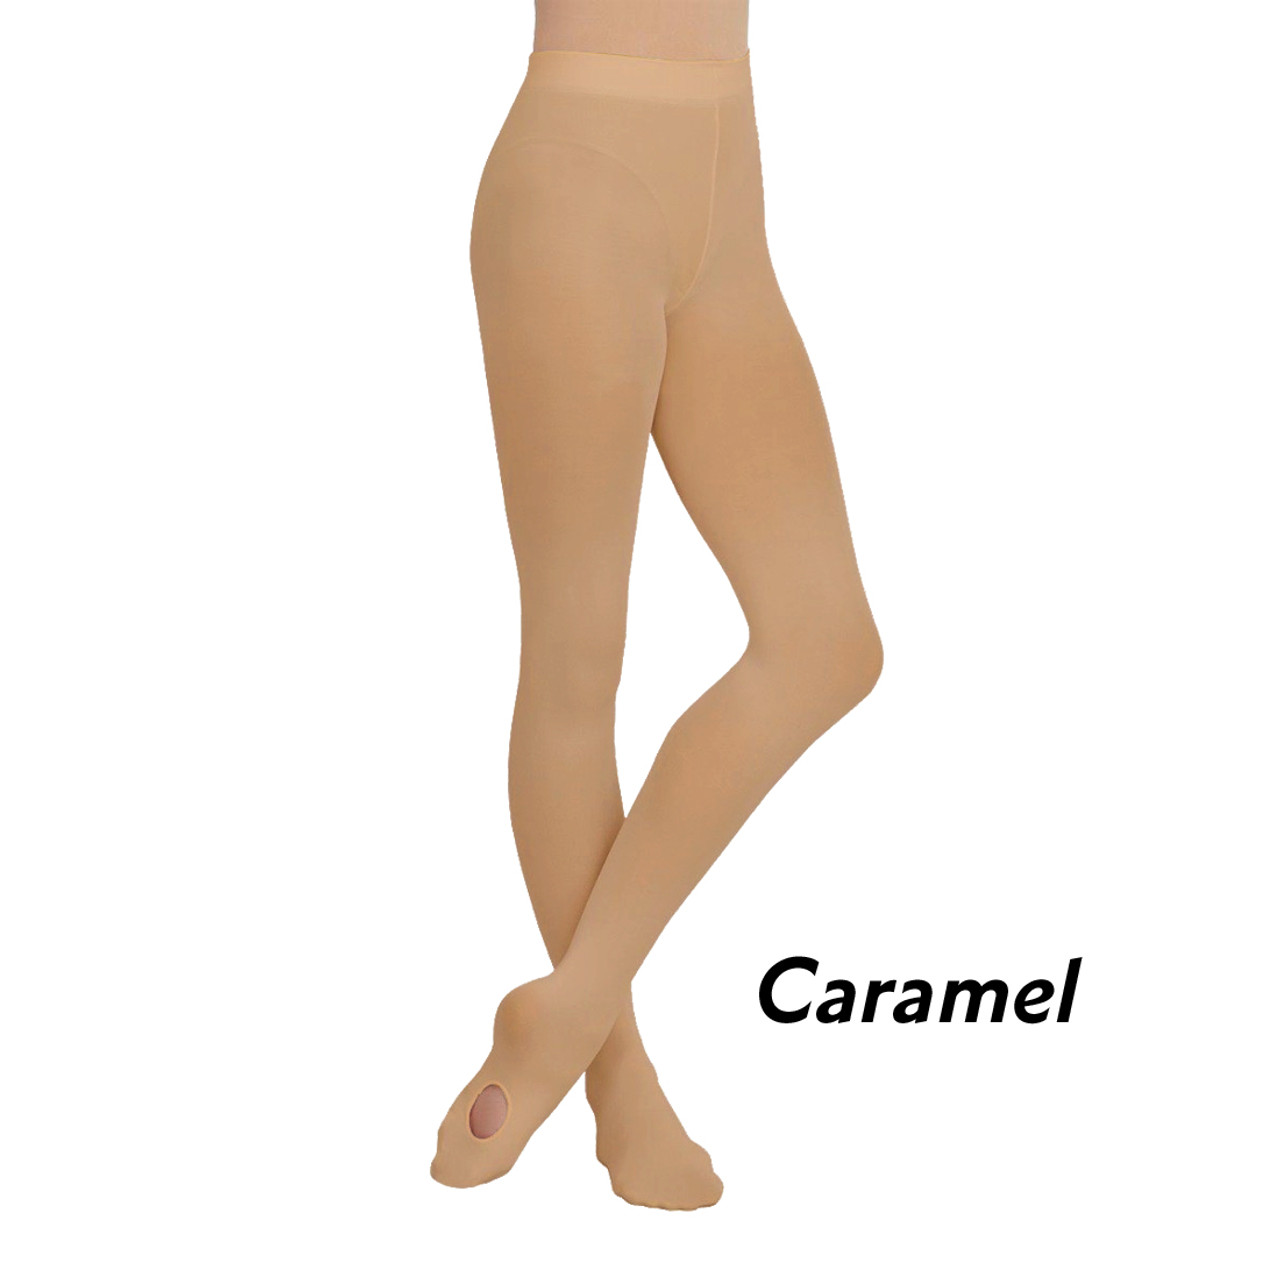 Toddler Transition Tights with Self Knit Waistband - Convertible Tights, Capezio 1916X